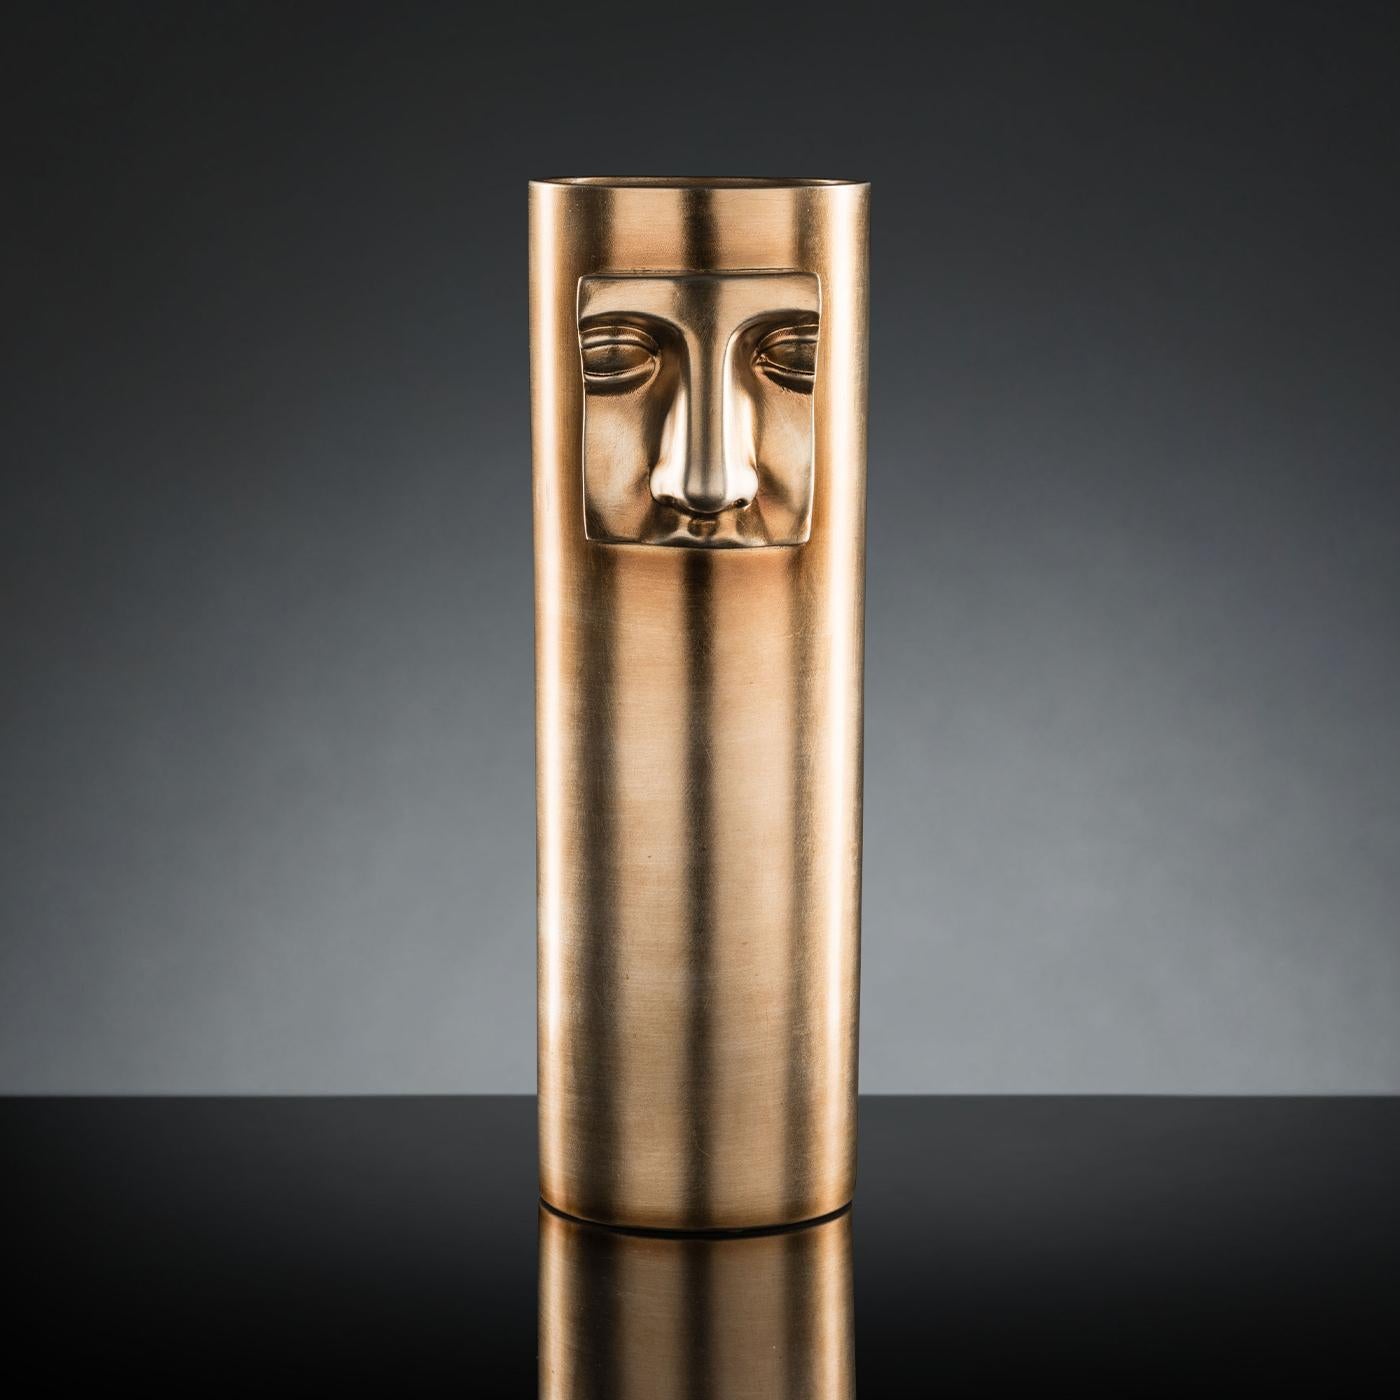 This exquisite decorative vase will infuse a contemporary living room or entryway with a unique and sophisticated aura. Superbly handcrafted of ceramic and finished in a metallic brass color, this cylindrical piece is enriched with a striking low